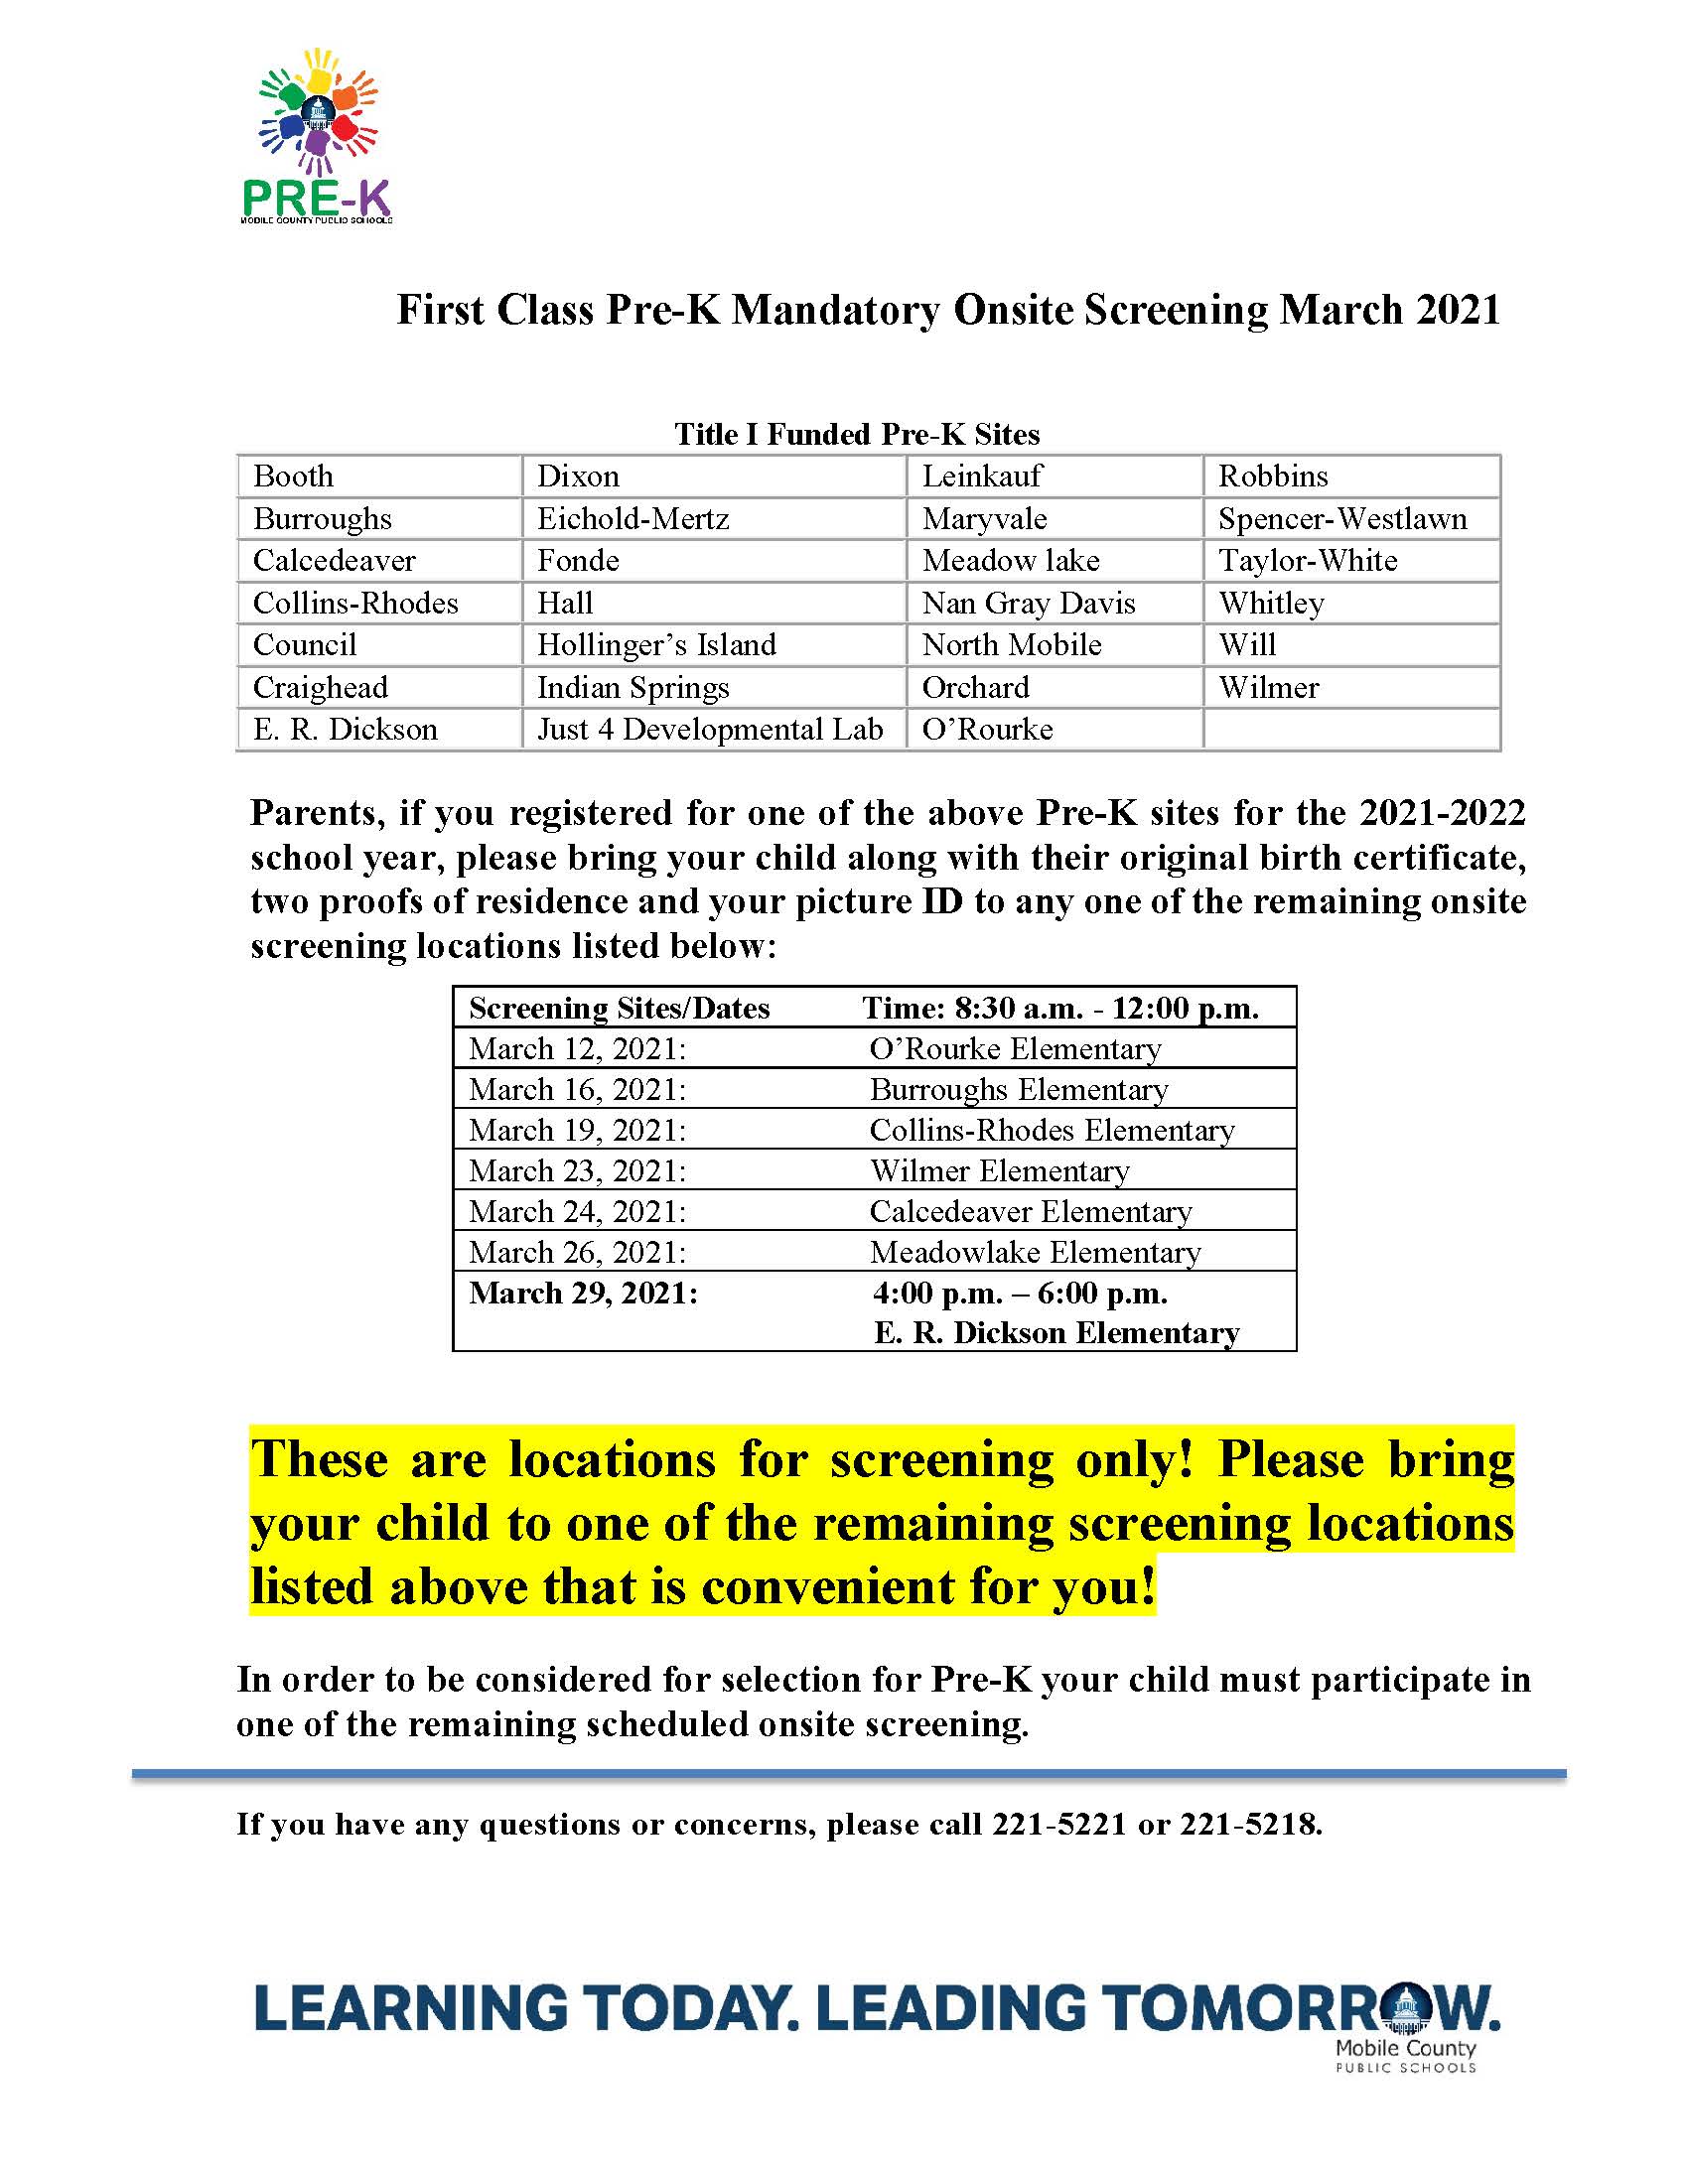 Pre-K Screening Dates and Locations